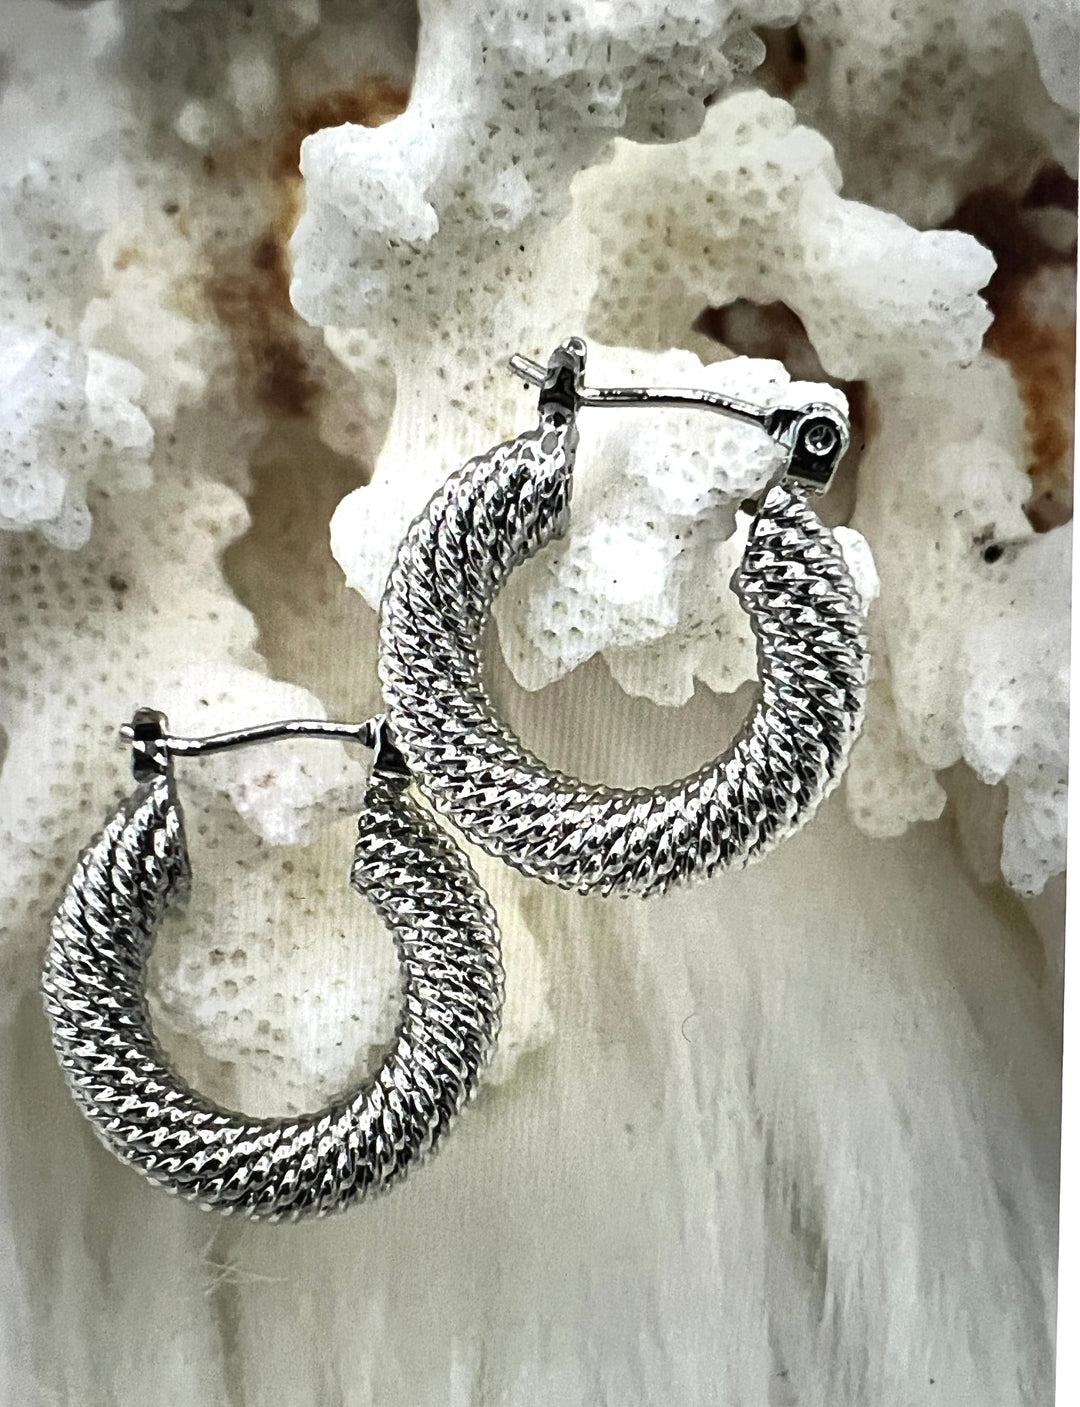 Textured Huggie Hoops, Choose from Silver or Gold